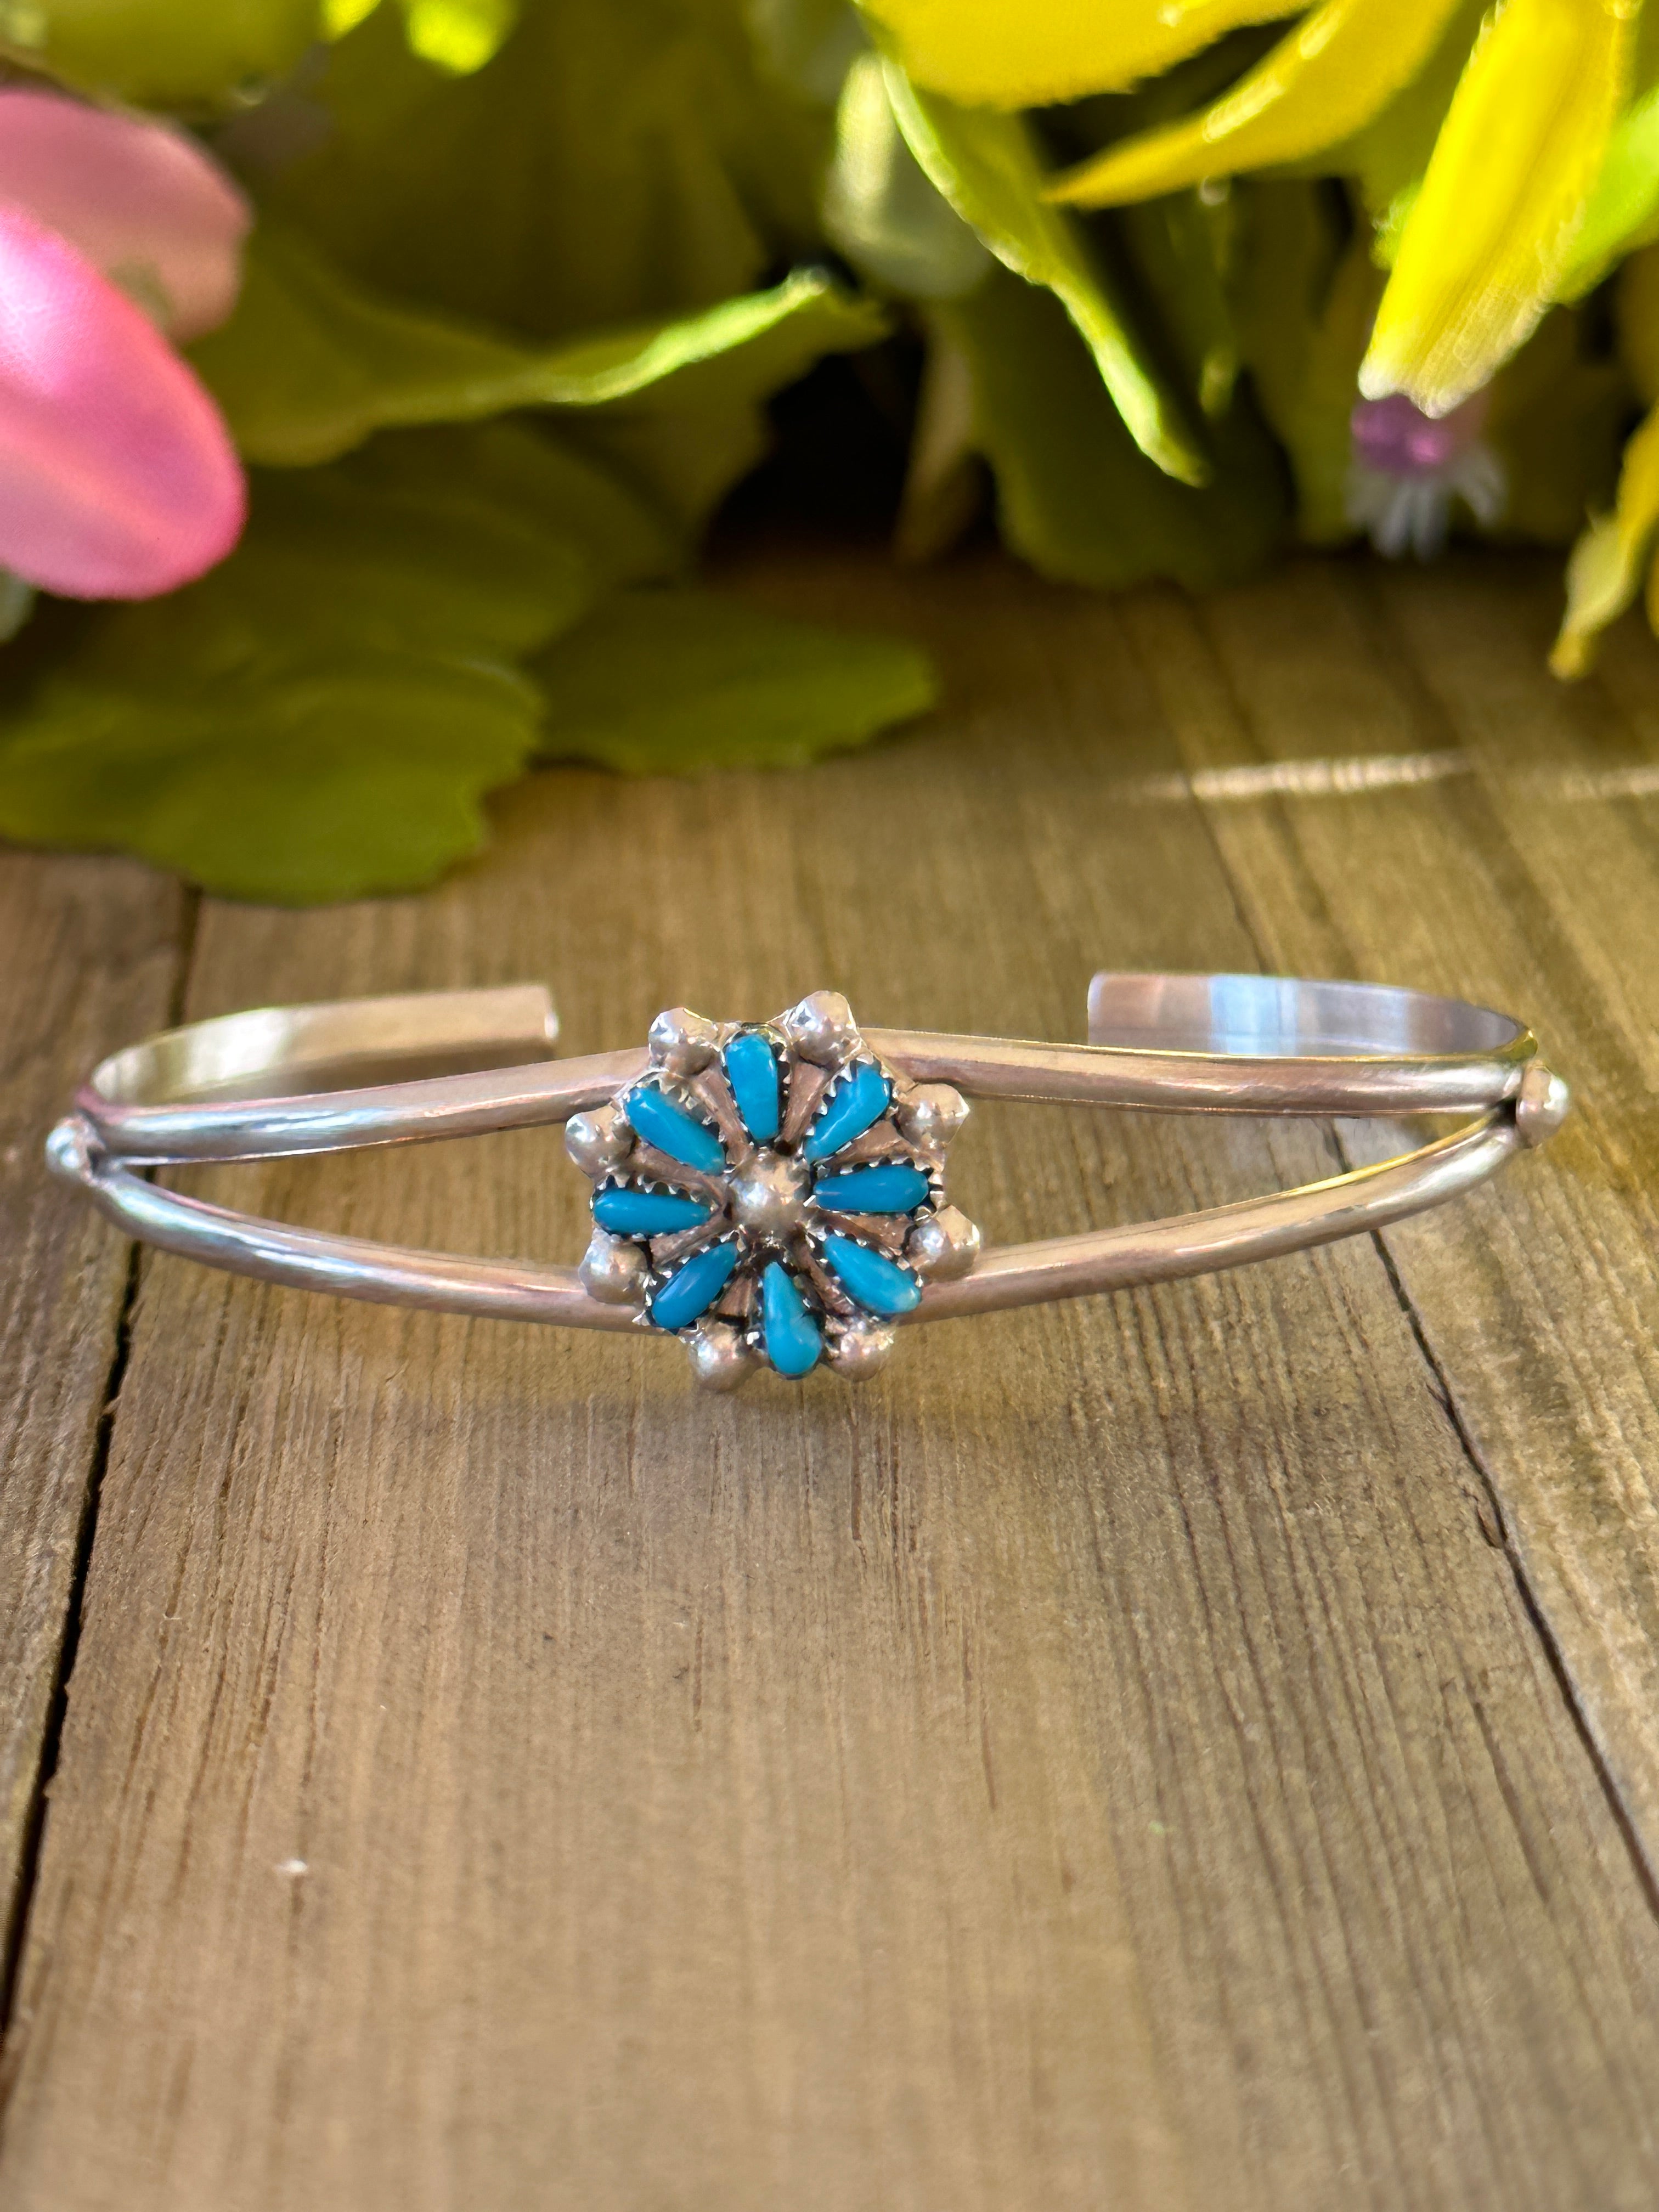 Zuni Made Turquoise & Sterling Silver Cuff Bracelet